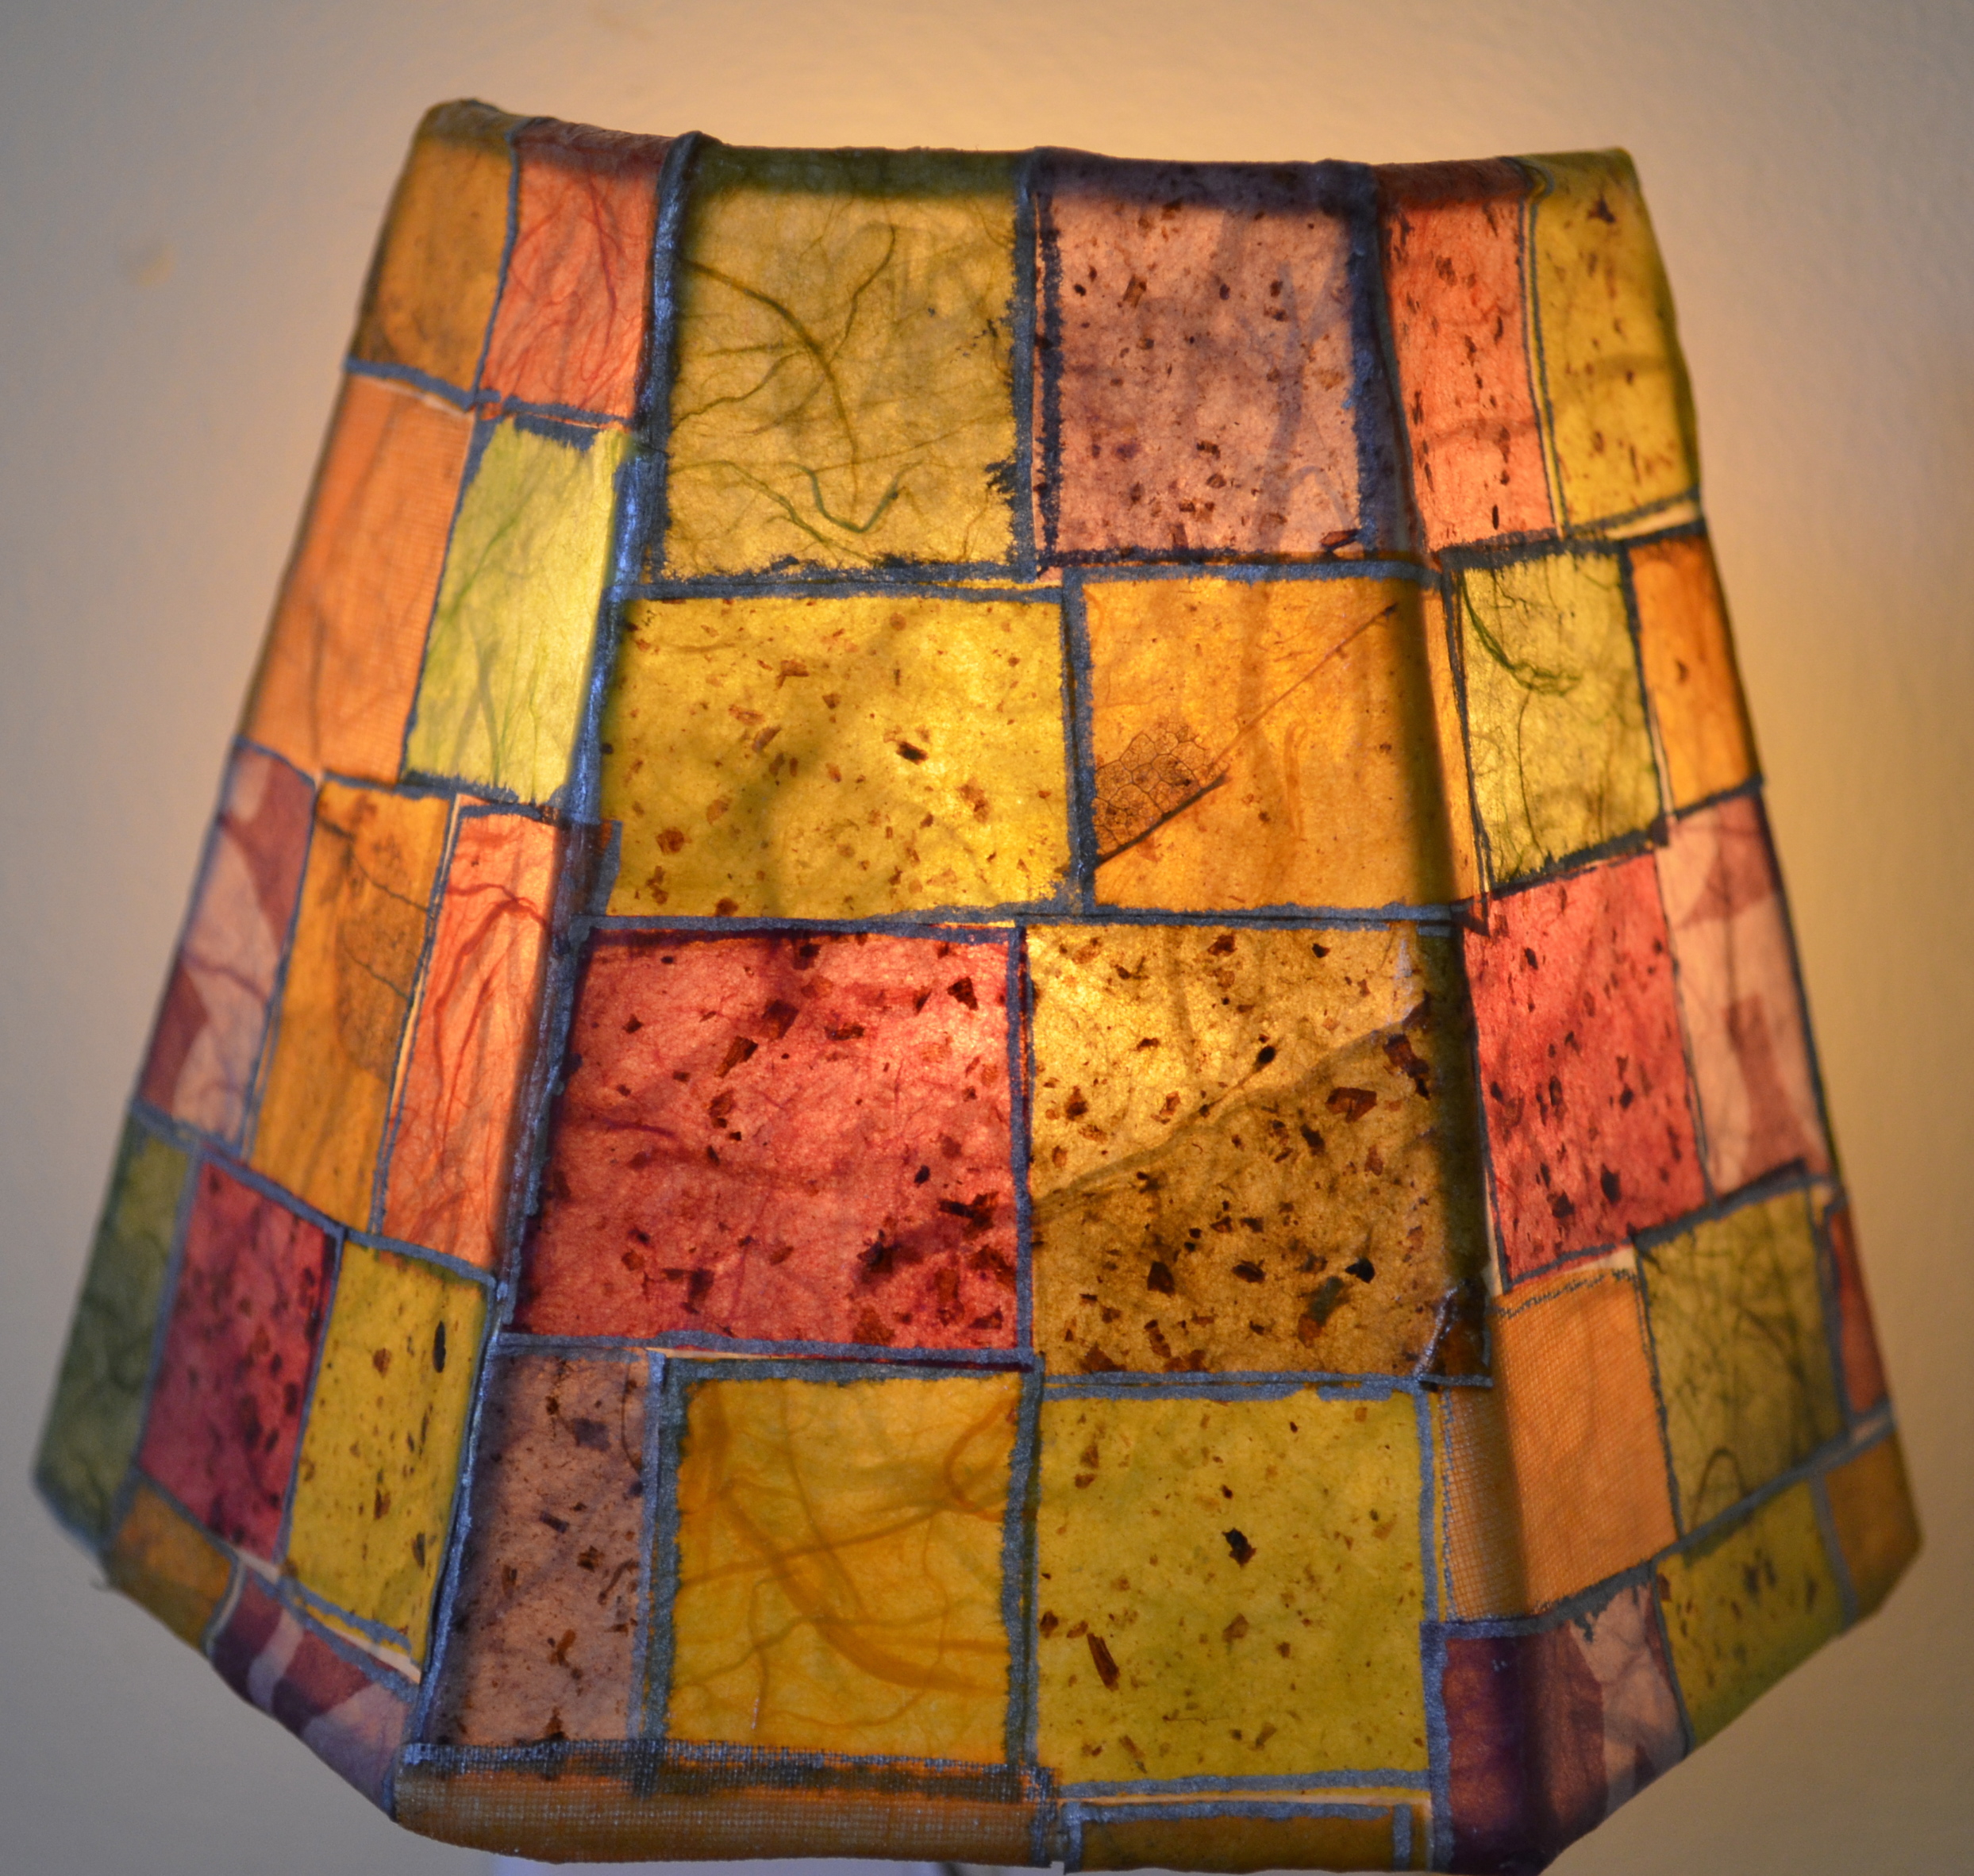 lit nitlight stained glass.jpg